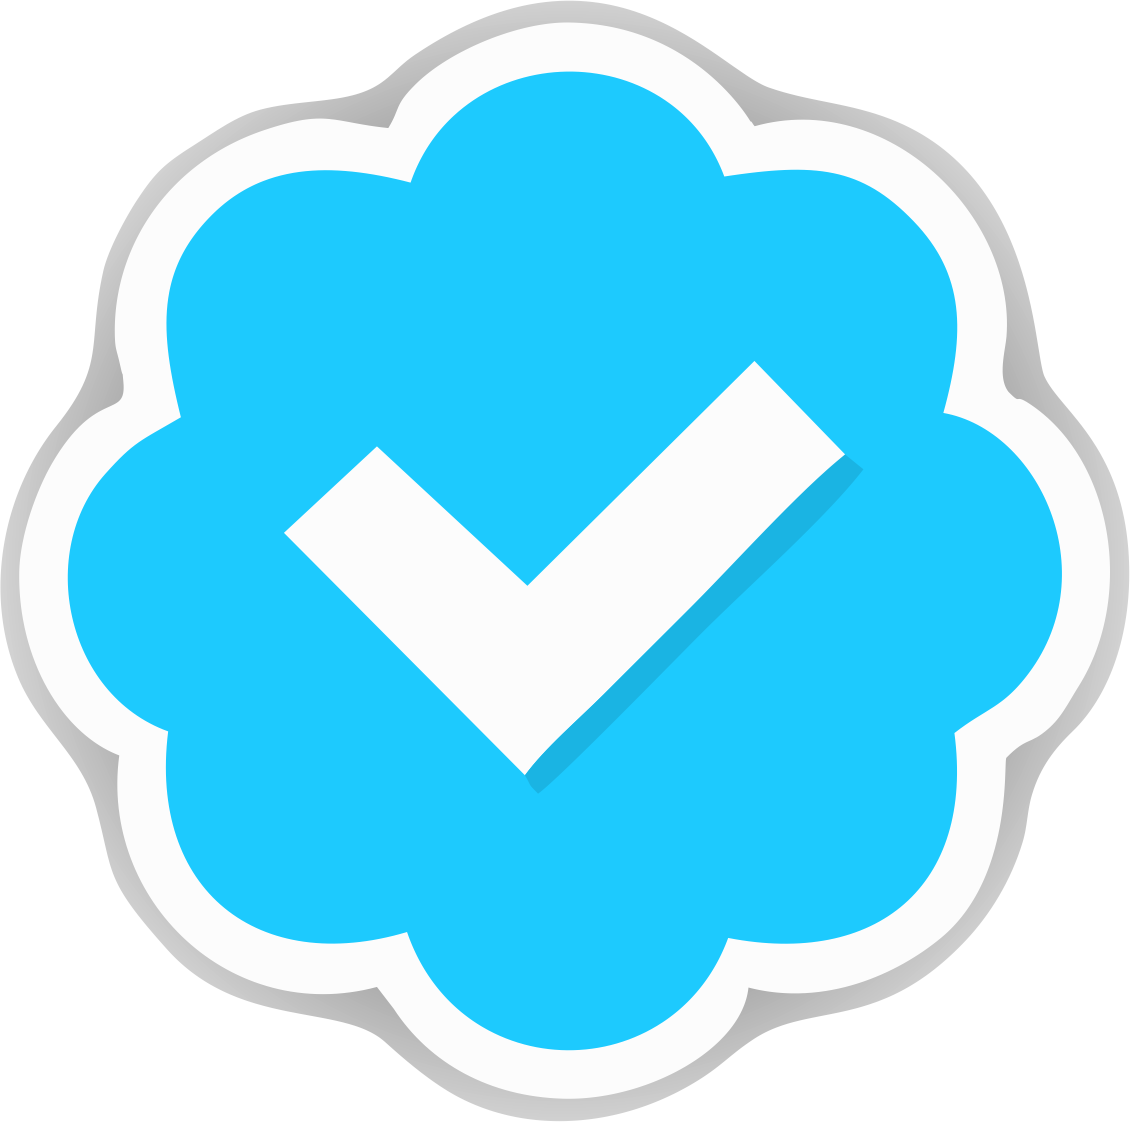  Twitter Verified Account Icon Vector and PNG Avaiable 